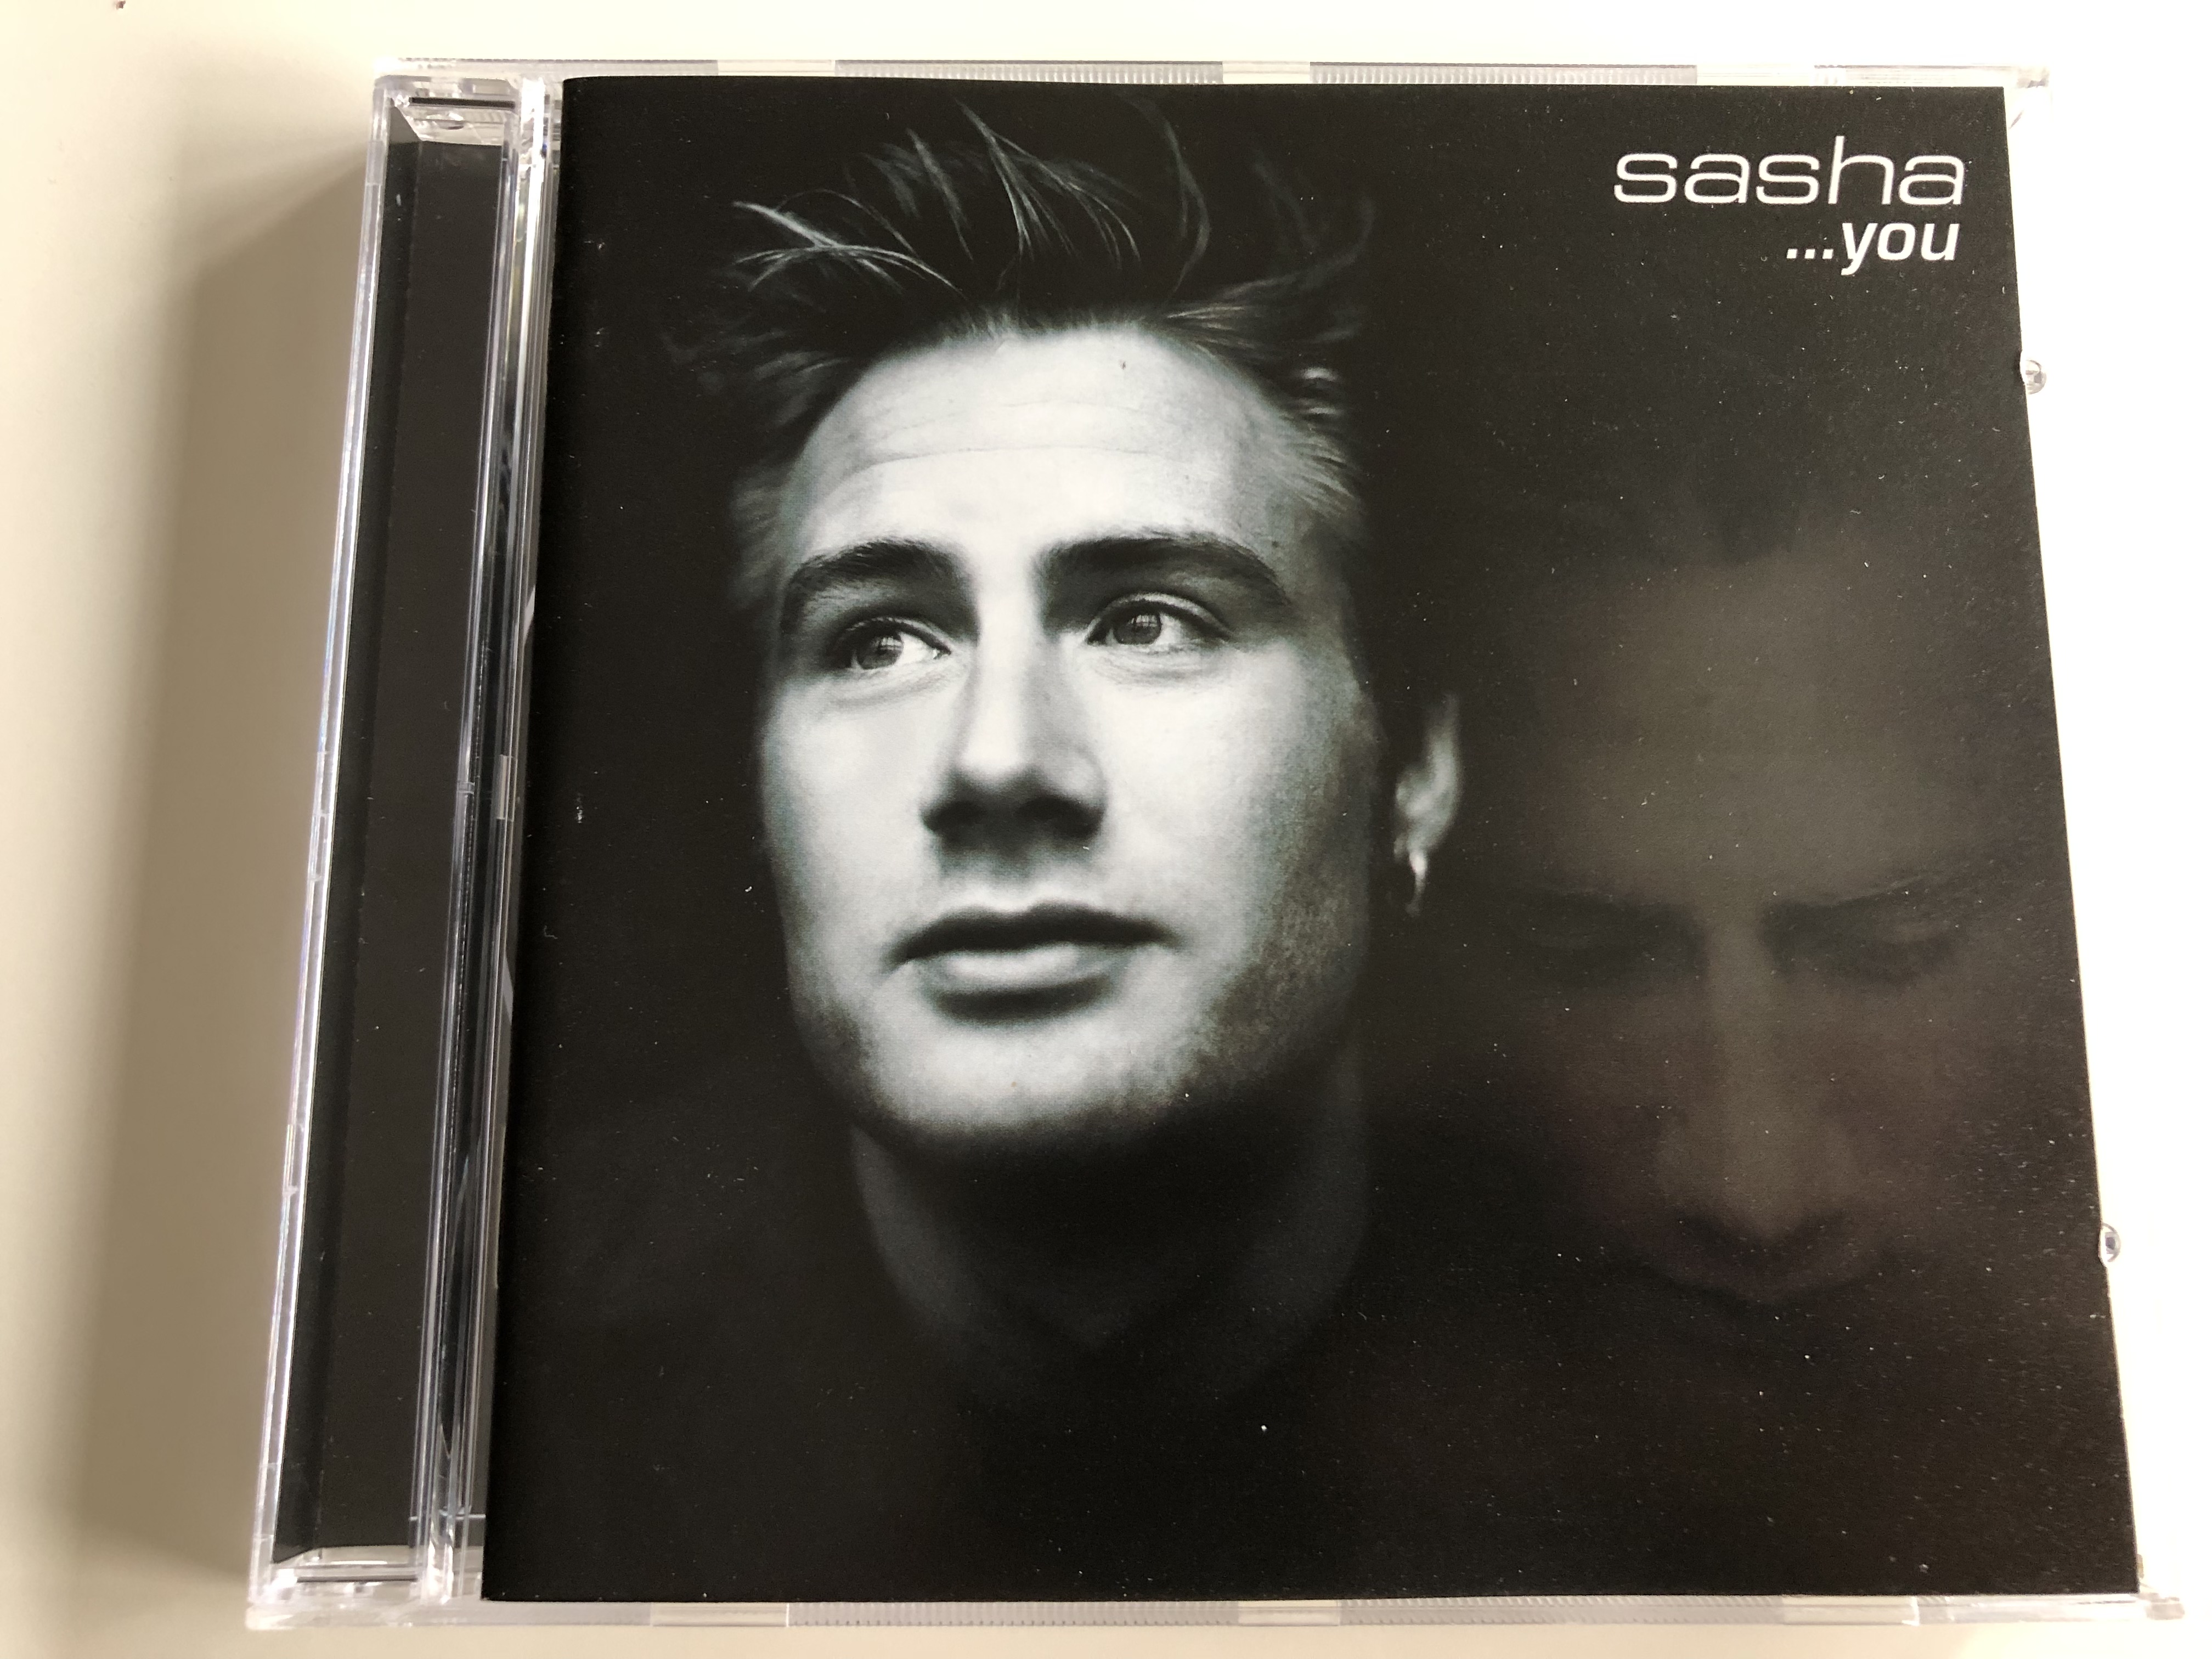 sasha-...-you-let-me-be-the-one-love-is-all-around-take-good-care-pretty-thing-reach-inside-produced-by-michael-b.-di-lorenzo-audio-cd-2000-8573-82727-2-we833-1-.jpg